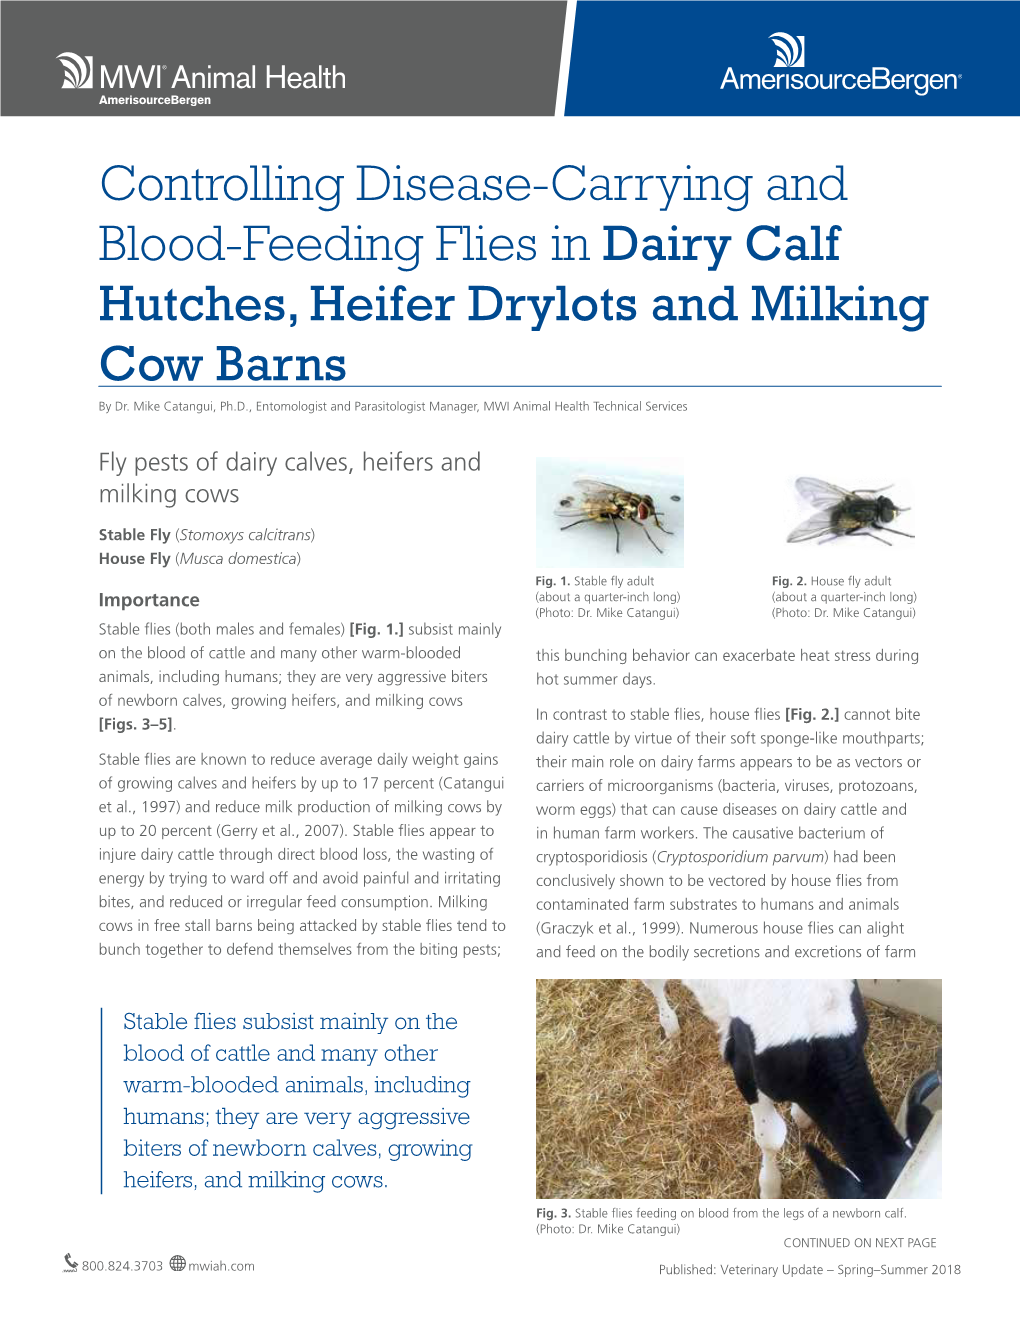 Controlling Disease-Carrying and Blood-Feeding Flies in Dairy Calf Hutches, Heifer Drylots and Milking Cow Barns by Dr